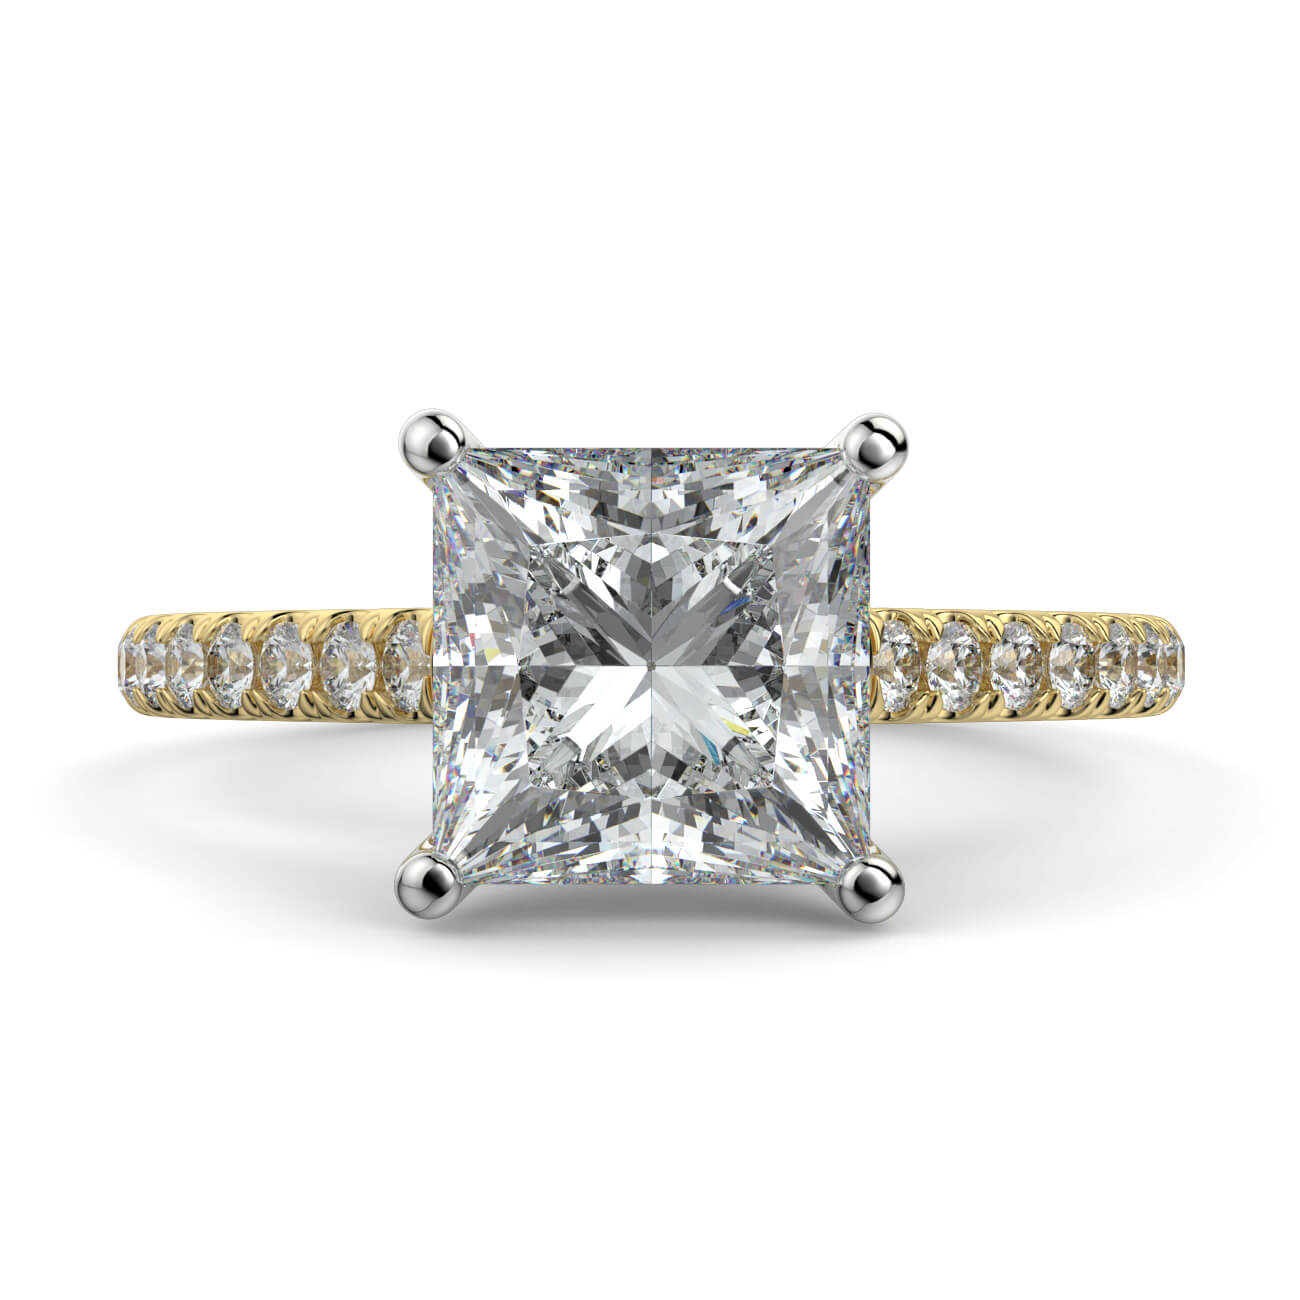 Princess Cut diamond cathedral engagement ring in yellow and white gold – Australian Diamond Network